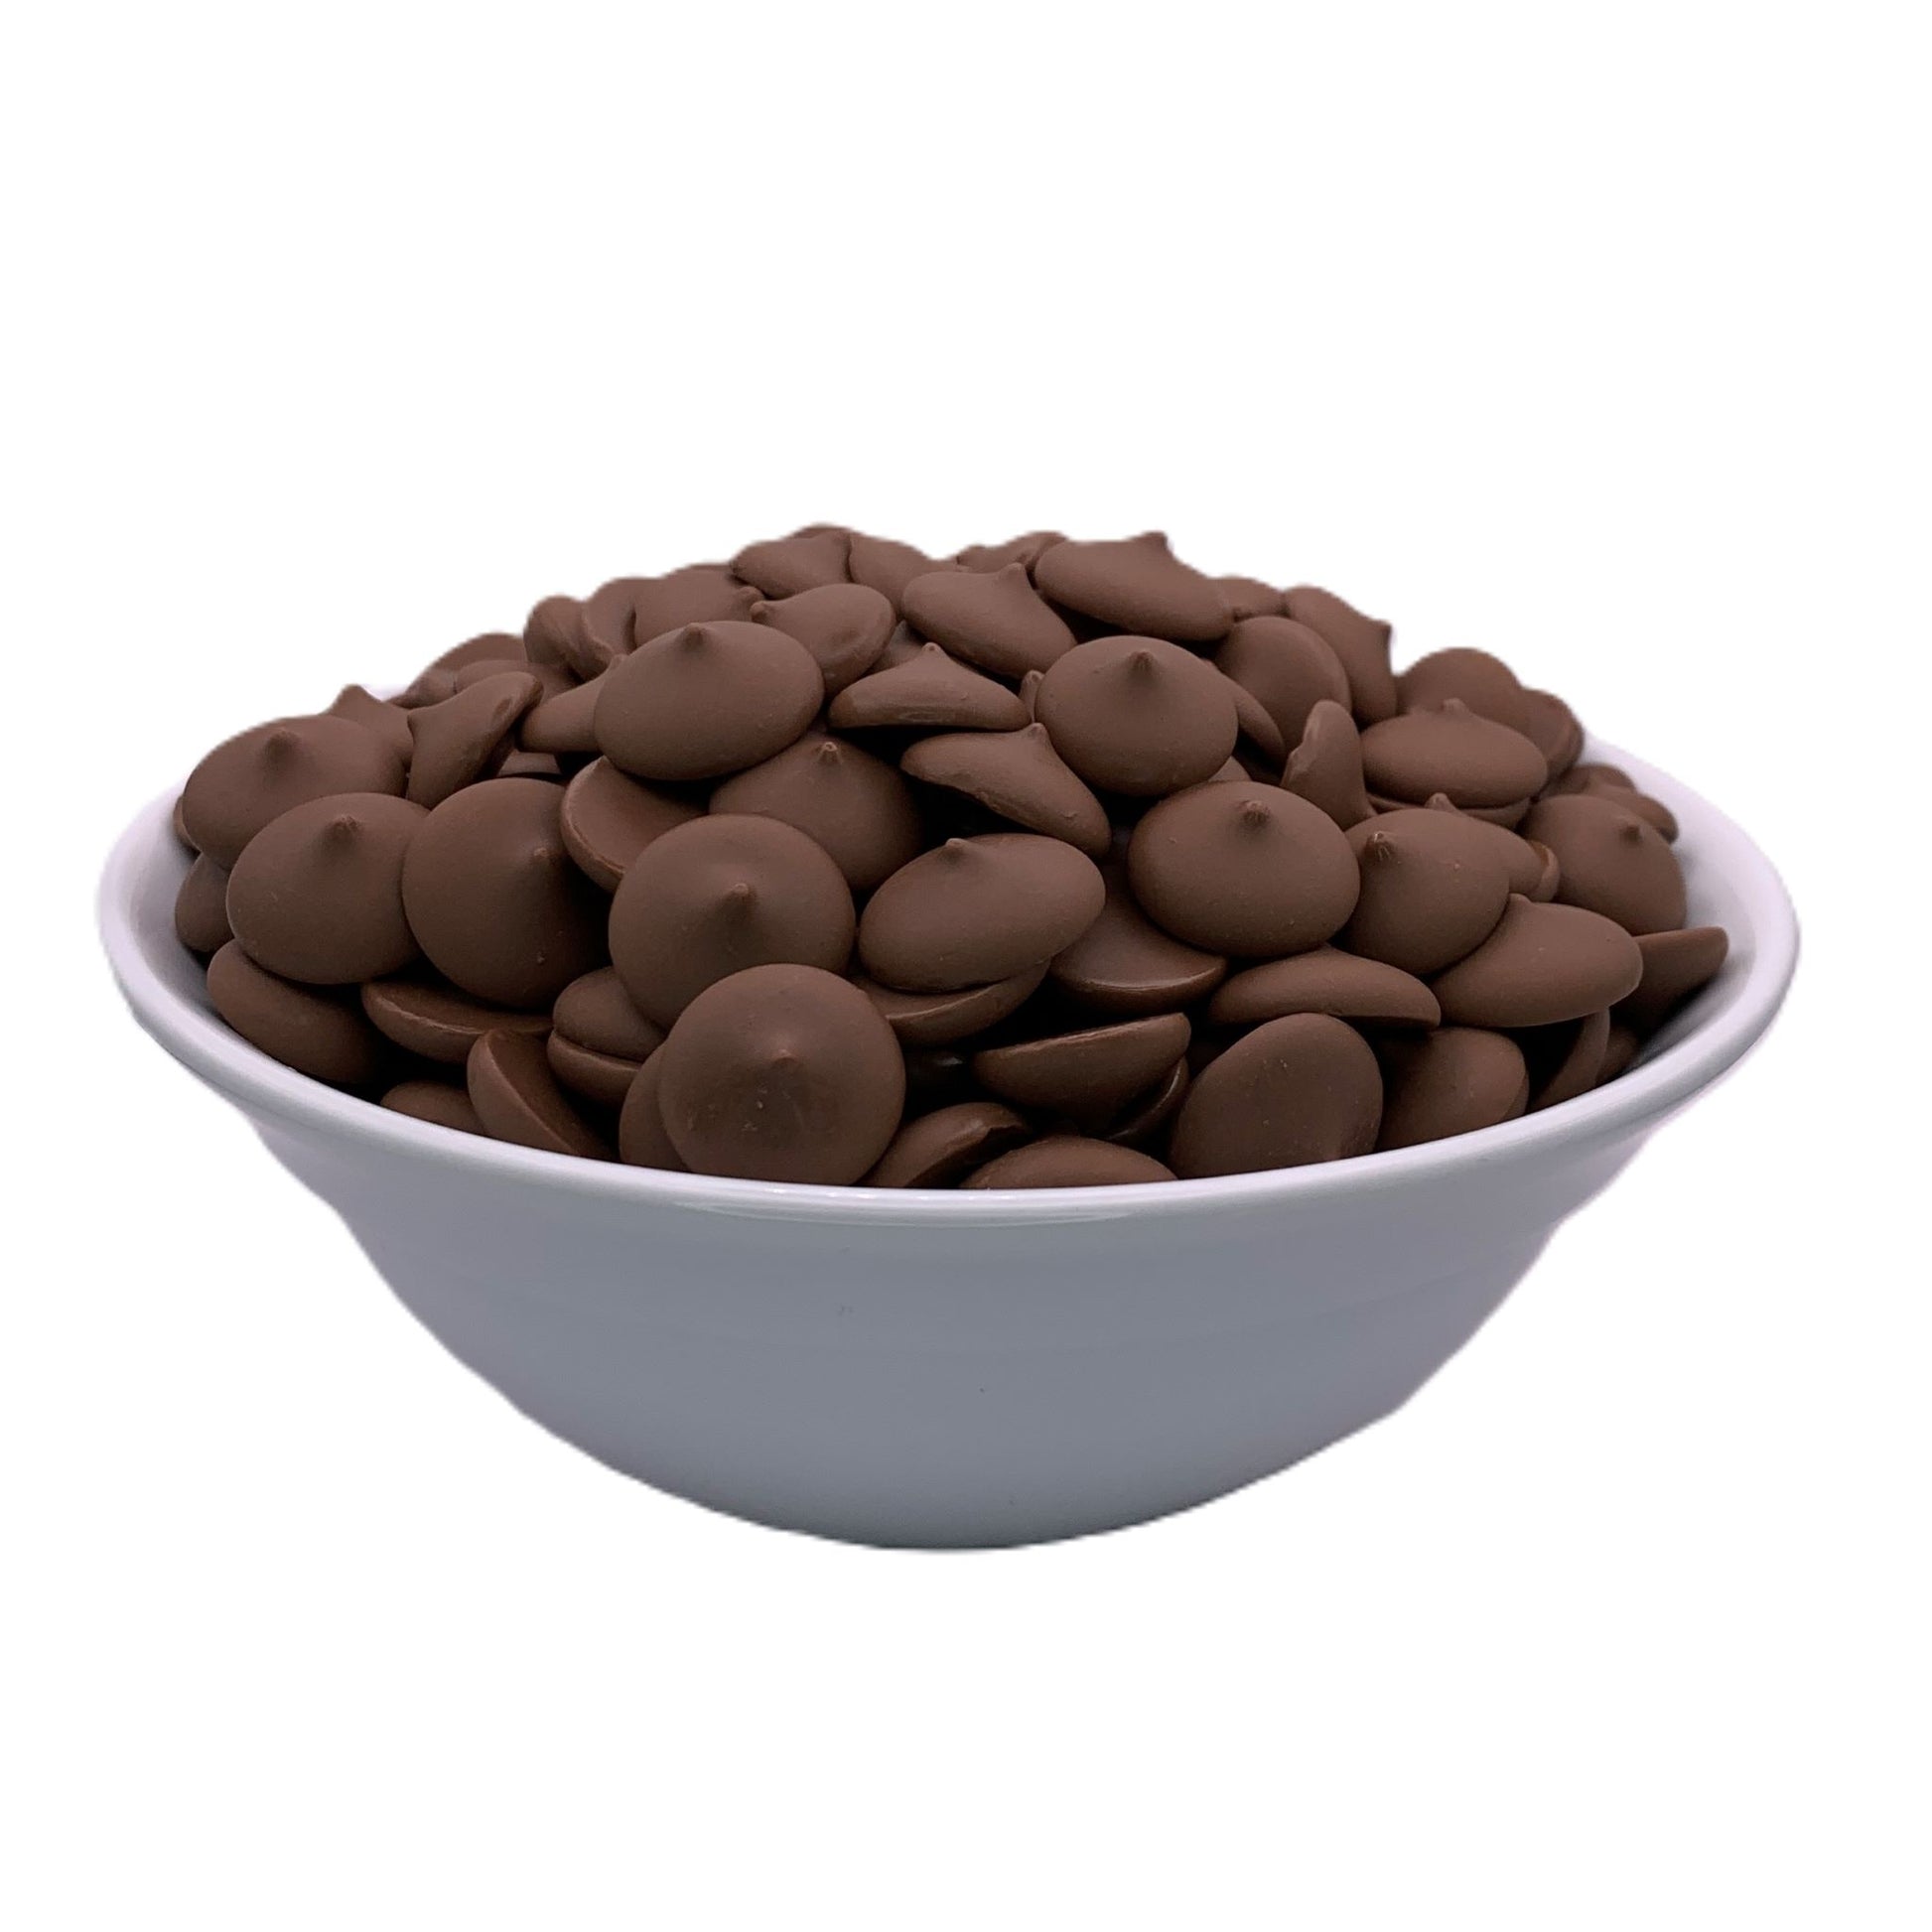 Bowl of Peters Eastchester dark chocolate melting wafers on a white background, angled to show the rich brown hue and smooth texture, perfect for elegant dessert creations.